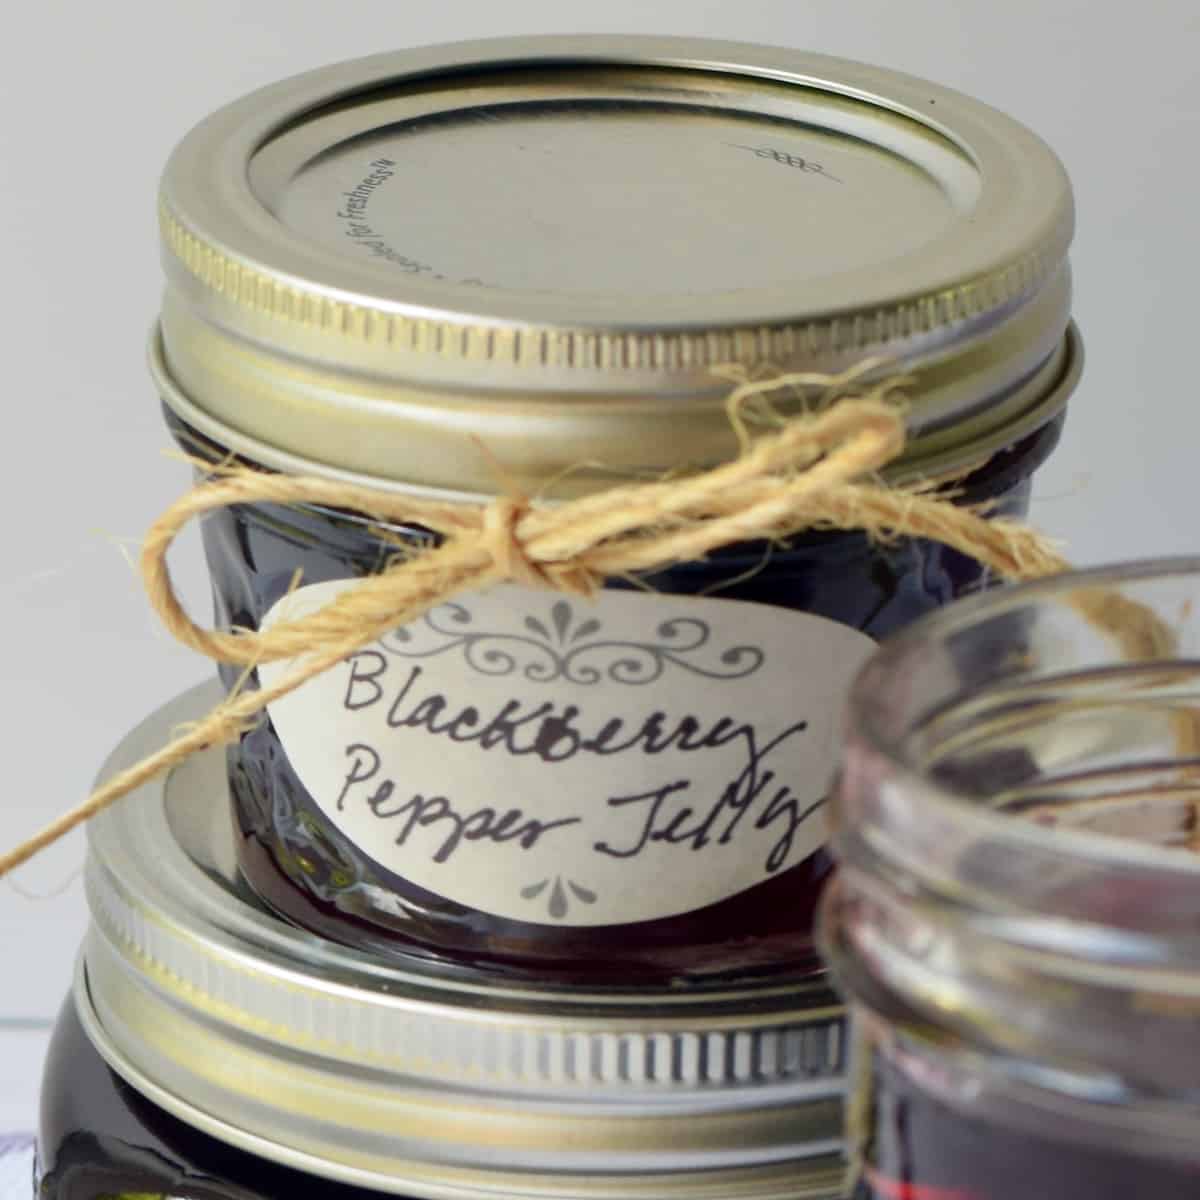 Blackberry Pepper Jelly close up of tiny jar labeled with jute string tied.